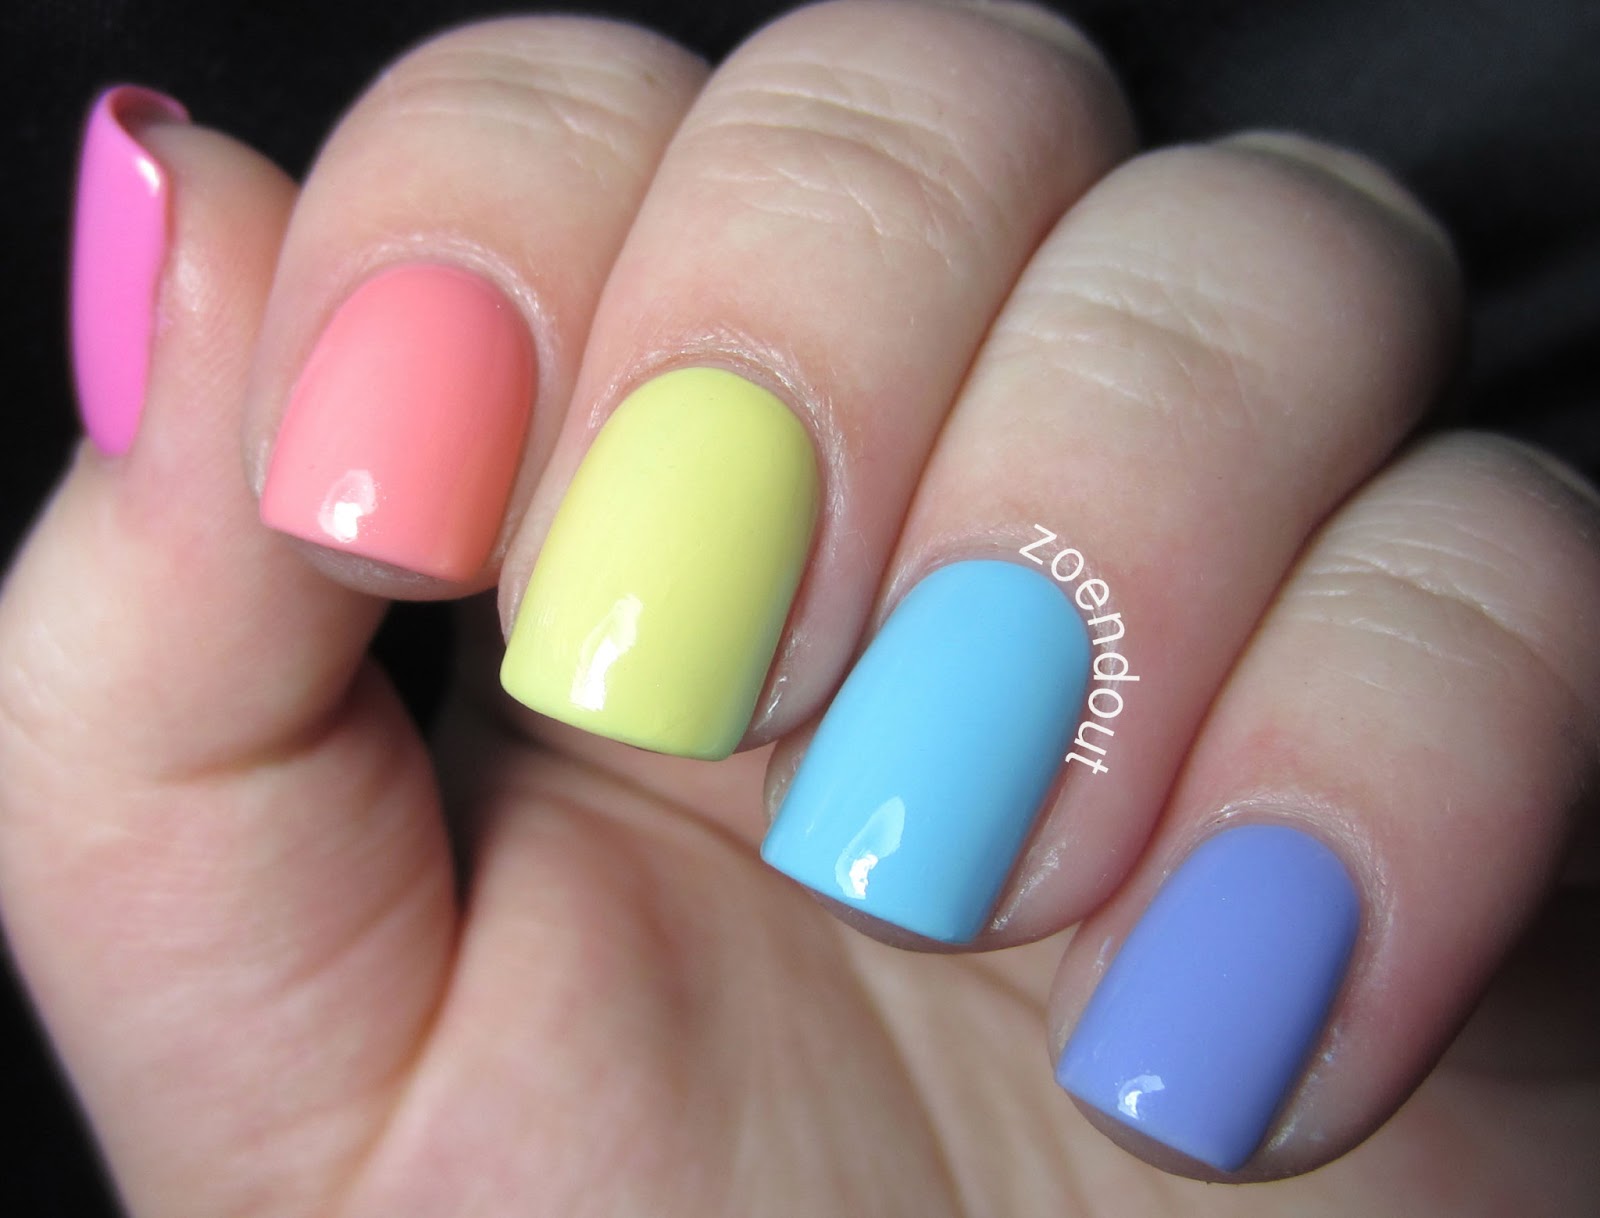 3. Pastel Rainbow Nails for Summer - wide 1